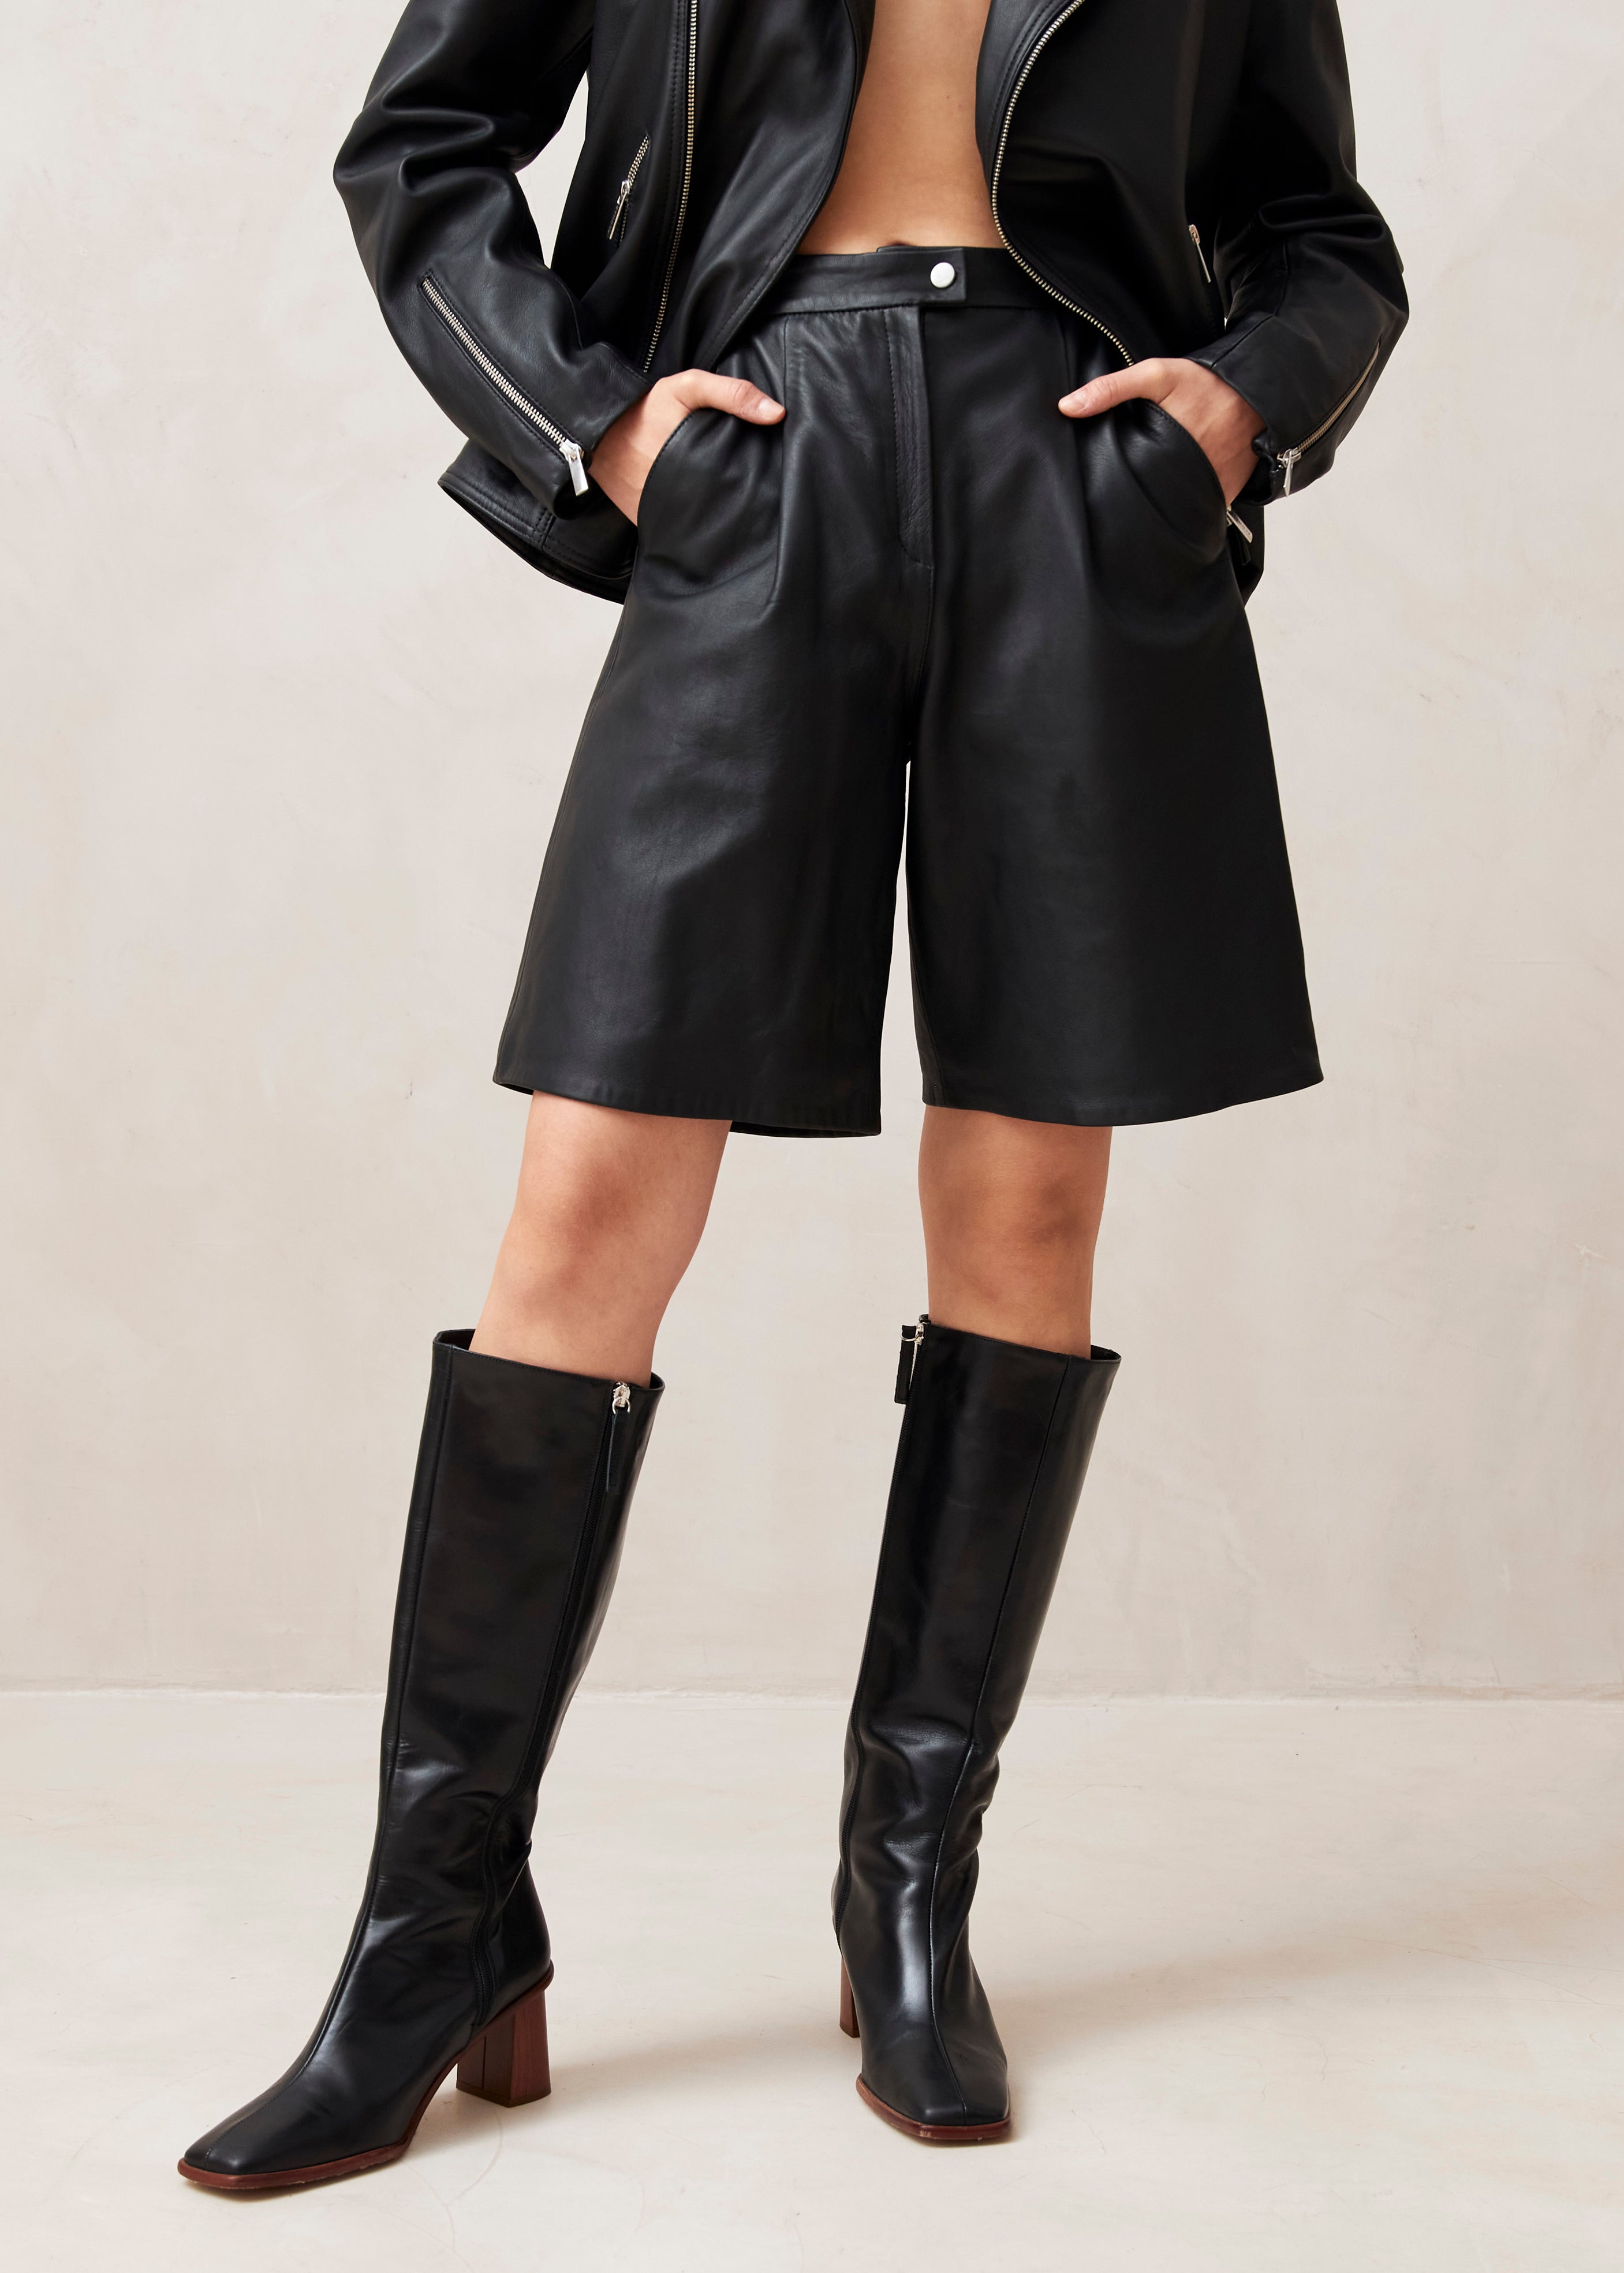 Toulouse Black Leather Shorts